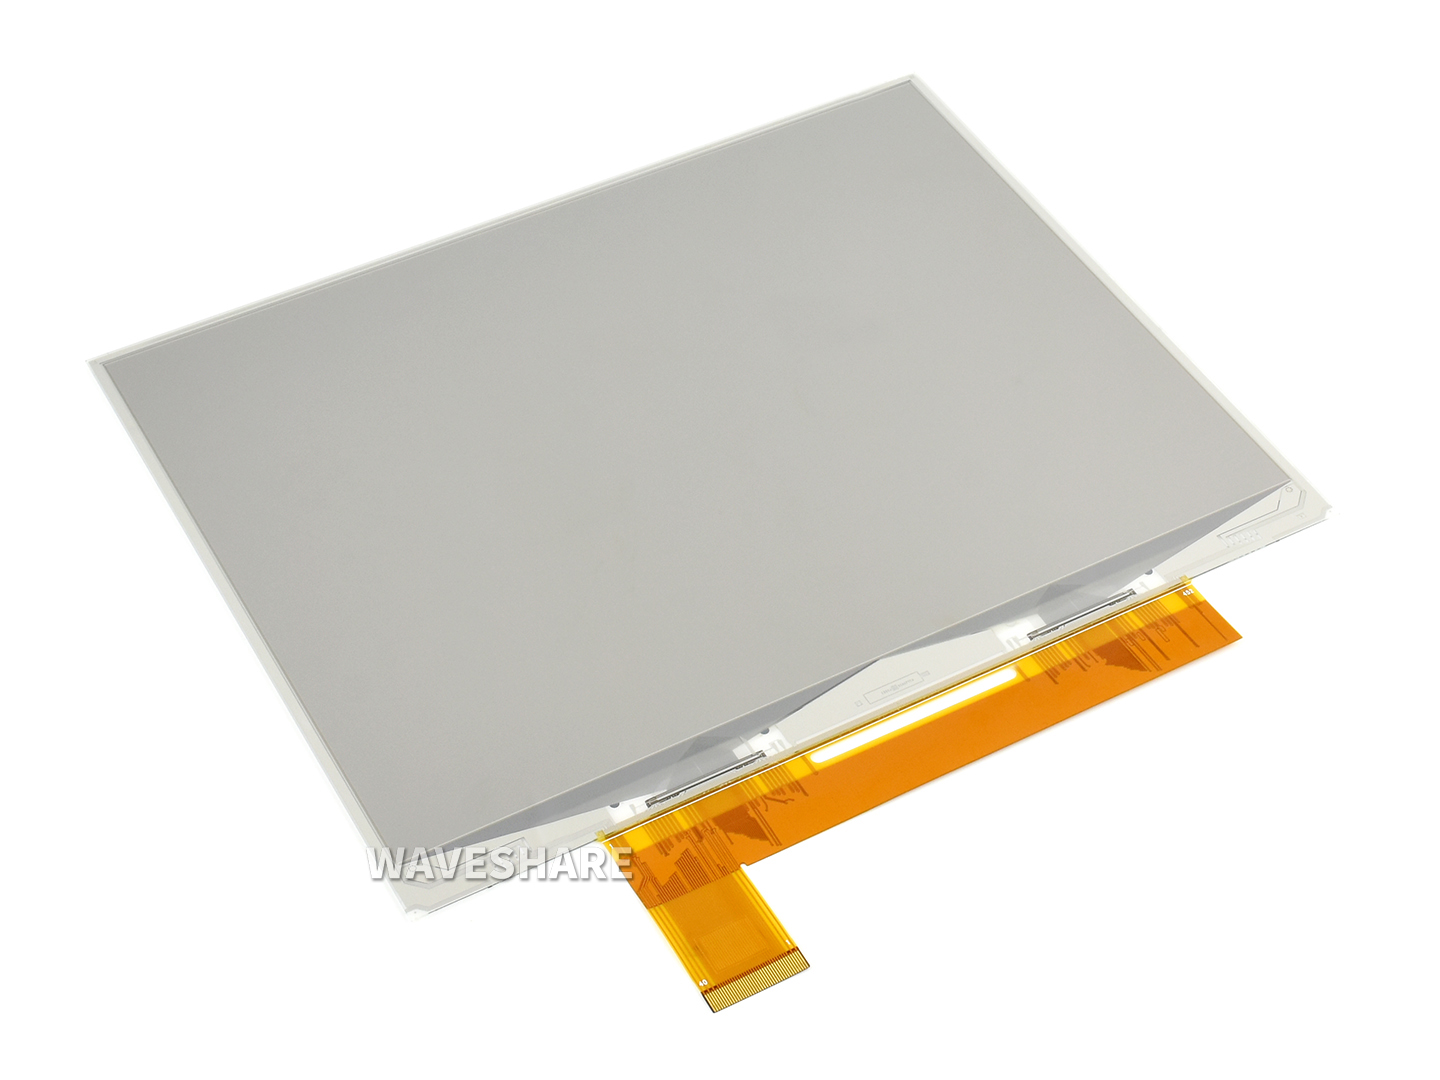 10.3inch e-Paper e-Ink Raw Display, 1872*1404, Black / White, 16 Grey Scales, Parallel Port, without